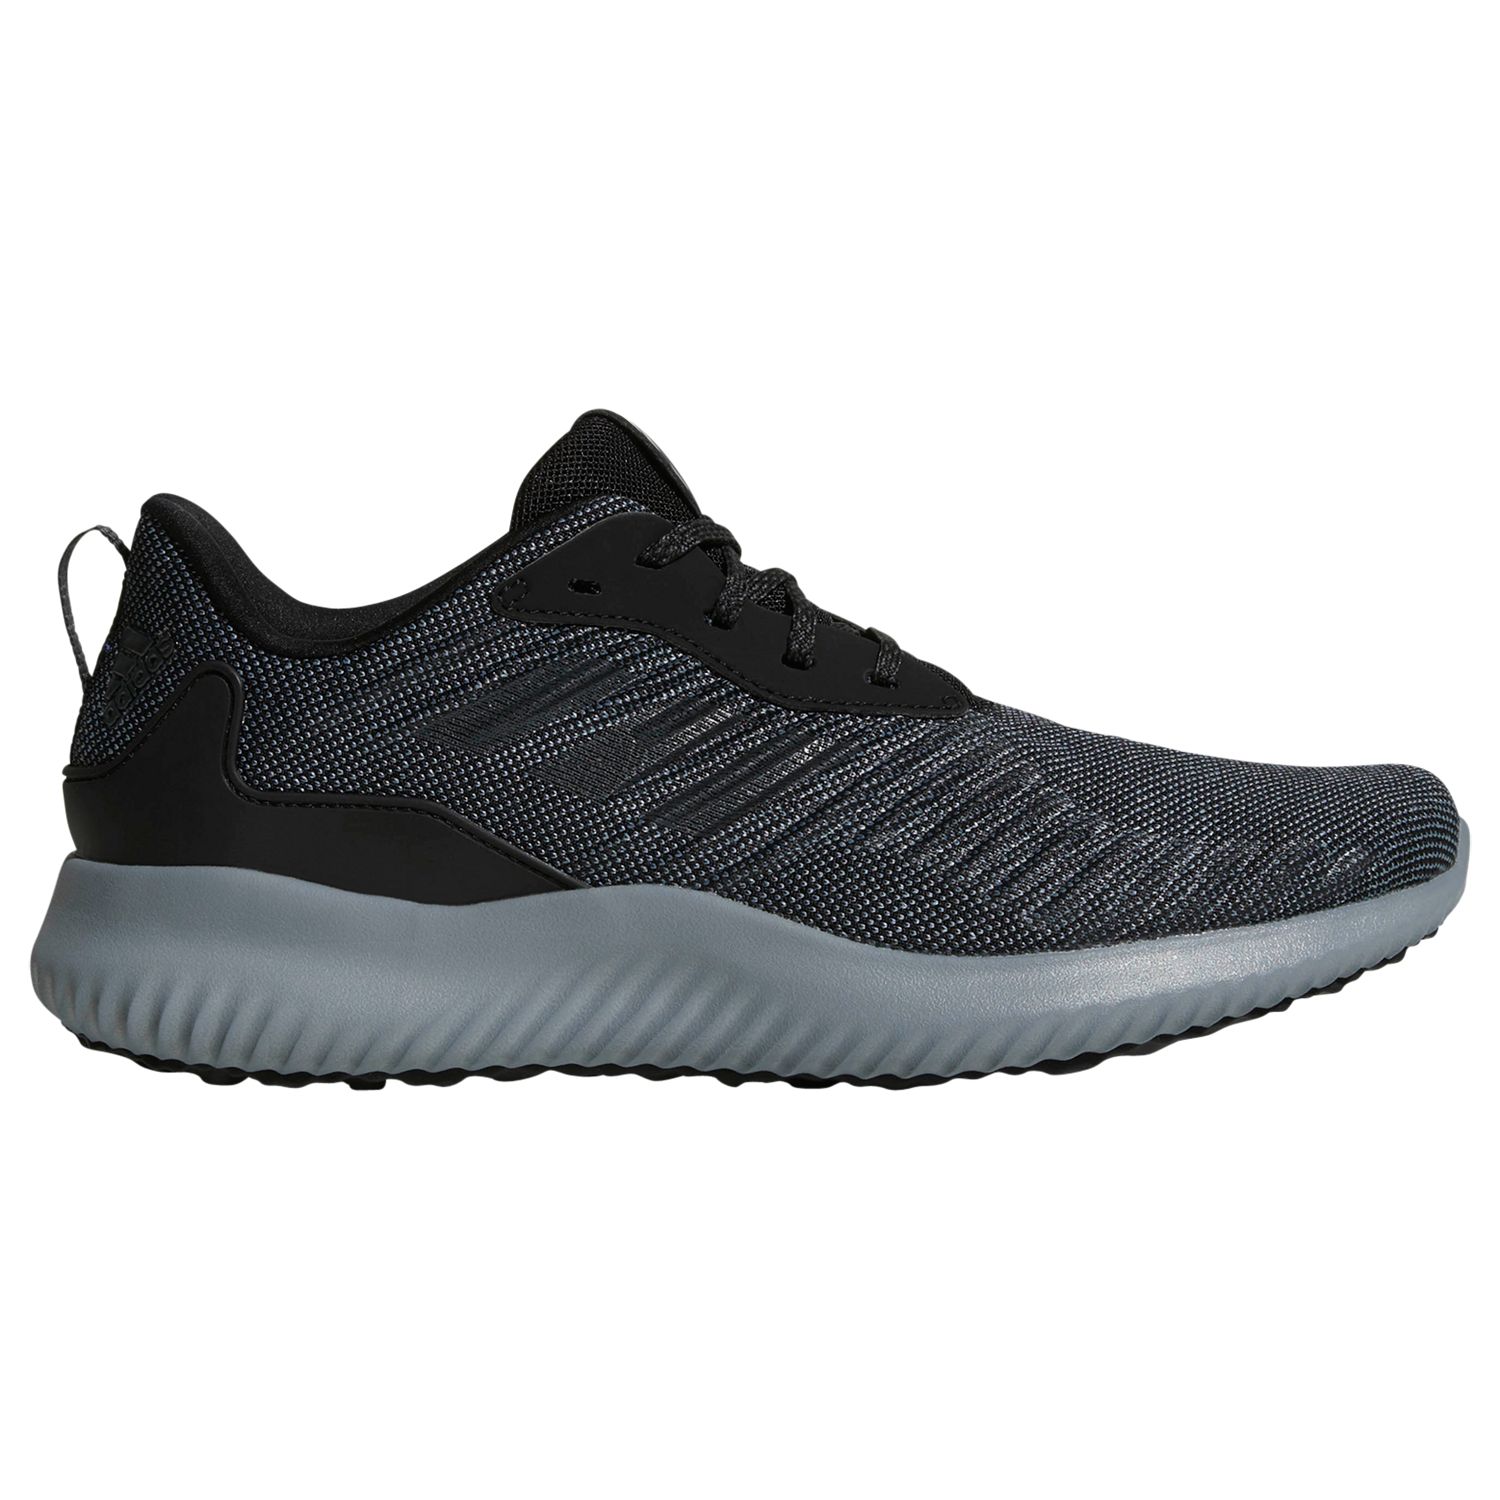 adidas Alphabounce RC Men's Running Shoes, Black, 9.5